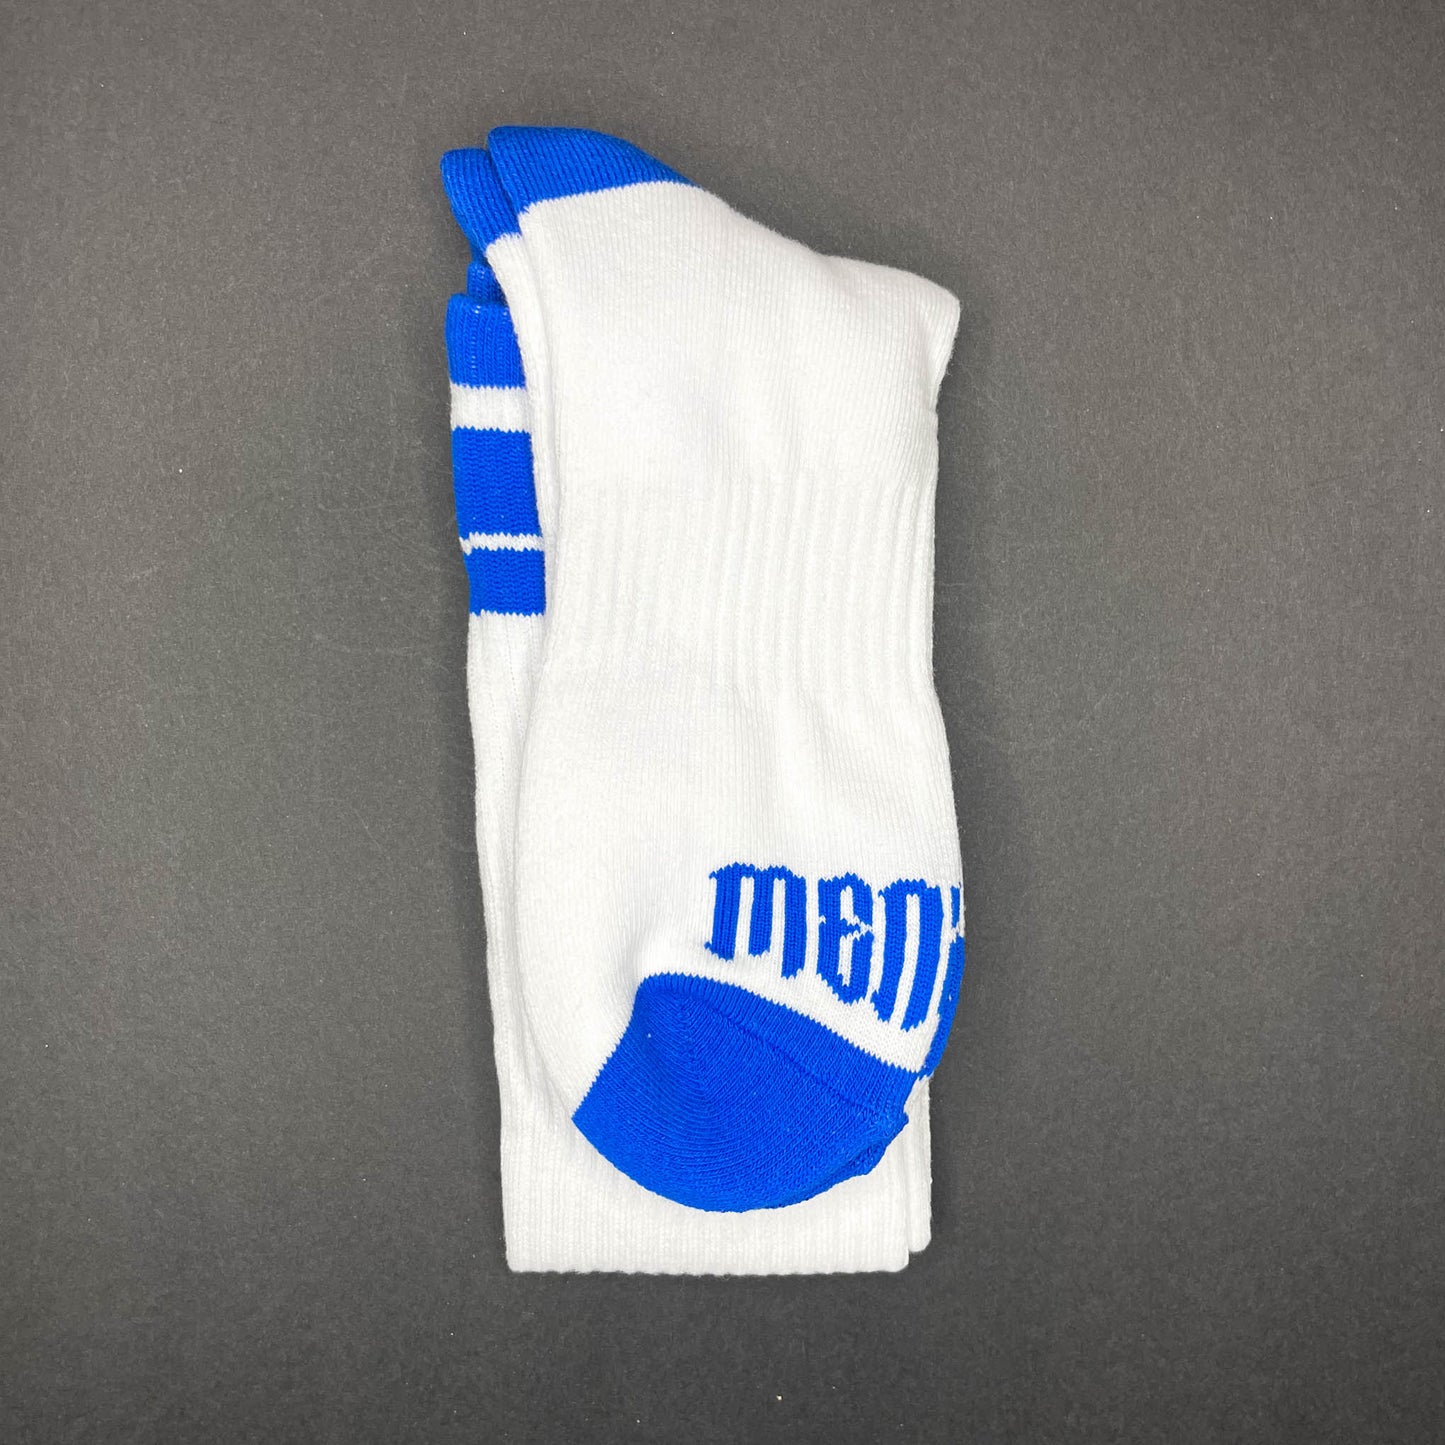 Menace Clothing blue and white Hood Rat knee high socks with Menace on toes.